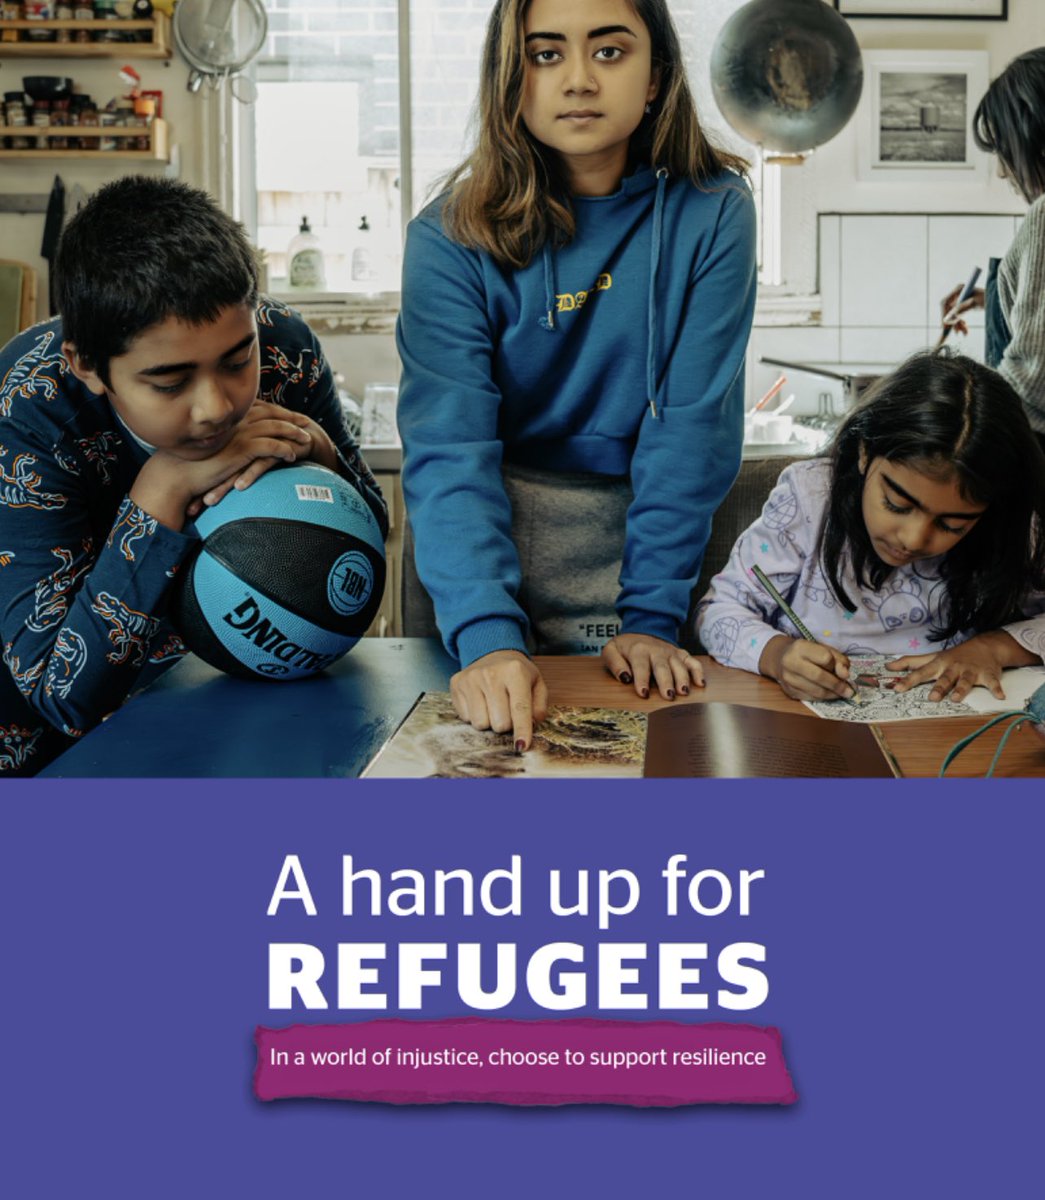 $604 million dollars to lock up 100 people seeking asylum in #Budget24 and increase of $41 million. 

35 times what they have budgeted to help people seeking asylum in the community, whose funding they cut by $20 million. 

Help the @ASRC1 fill the void: donate.asrc.org.au/takeaction